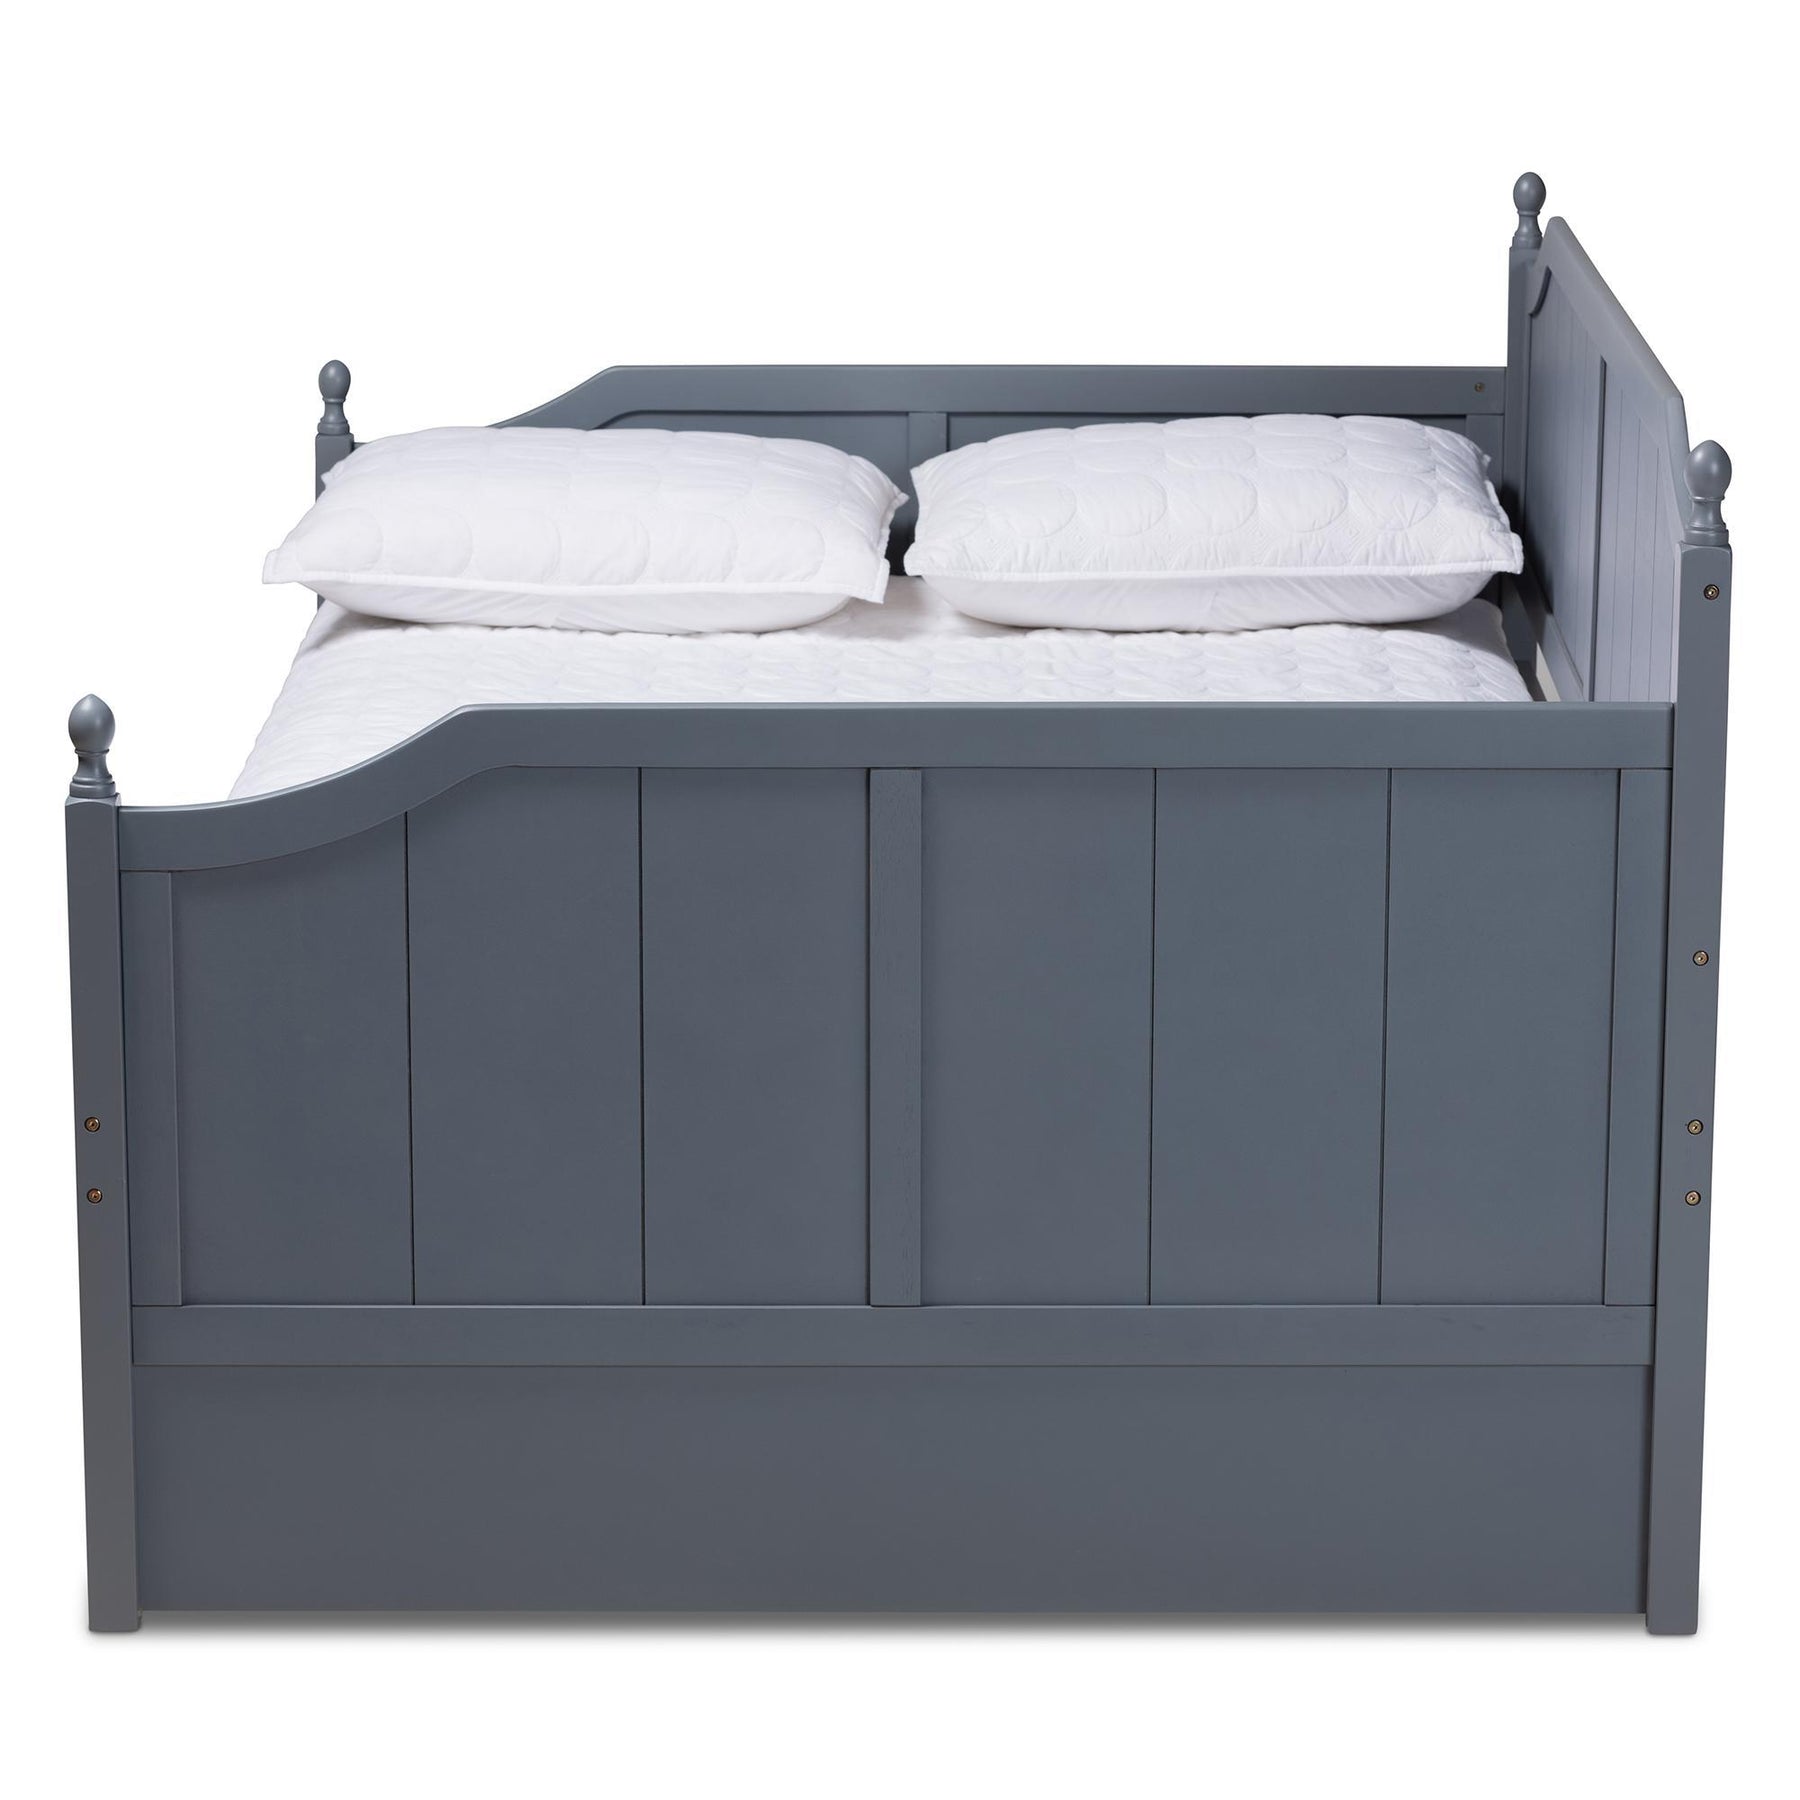 Baxton Studio Millie Cottage Farmhouse Grey Finished Wood Full Size Daybed With Trundle - MG0010-Grey-Daybed-Full